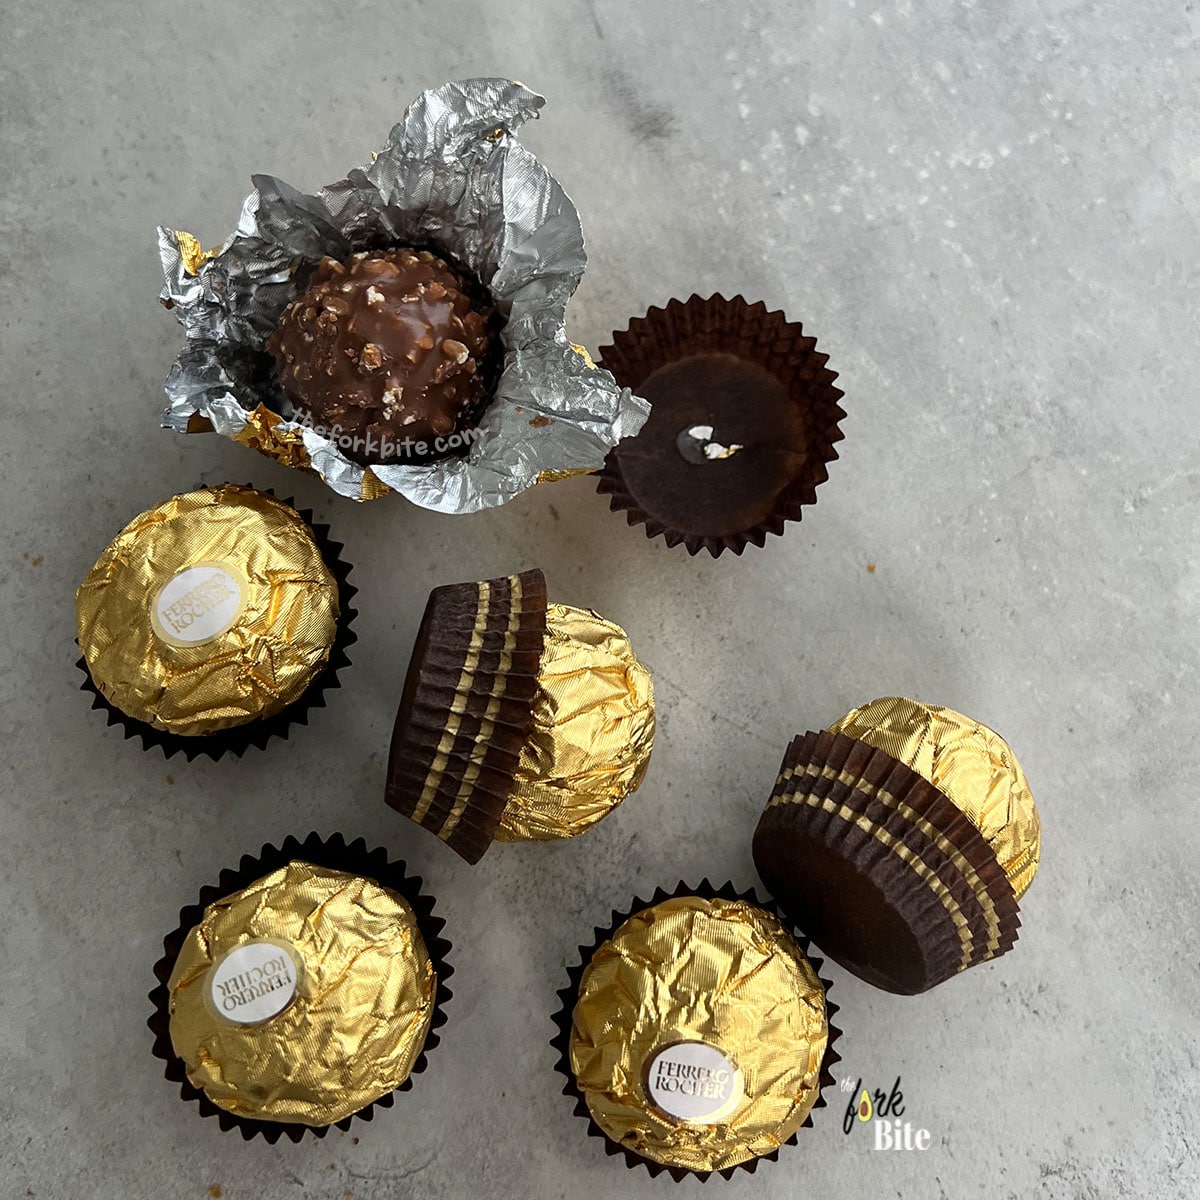 It turns out that Ferrero Rocher is one of the chocolates that are least likely to go bad. They are made with high-quality ingredients and have low water content; therefore, they can last for quite some time.